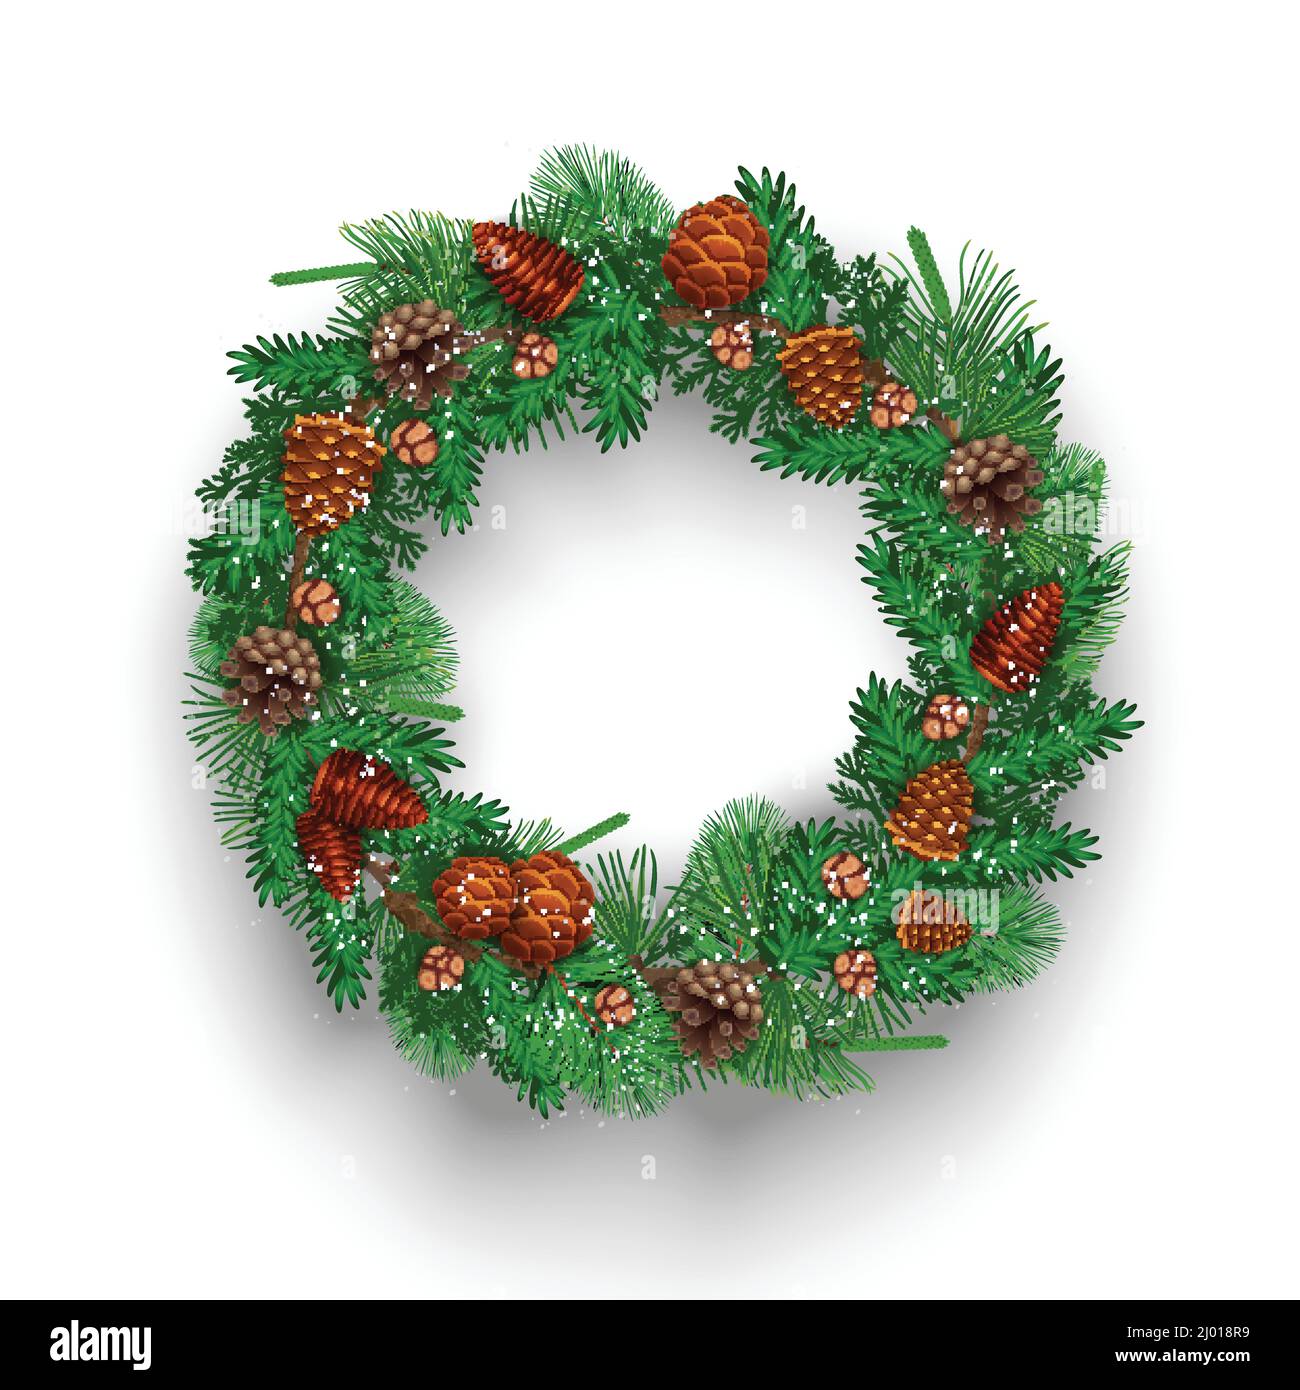 Fir christmas wreath composition with isolated image of circle shaped garland with cones and fresh needle vector illustration Stock Vector